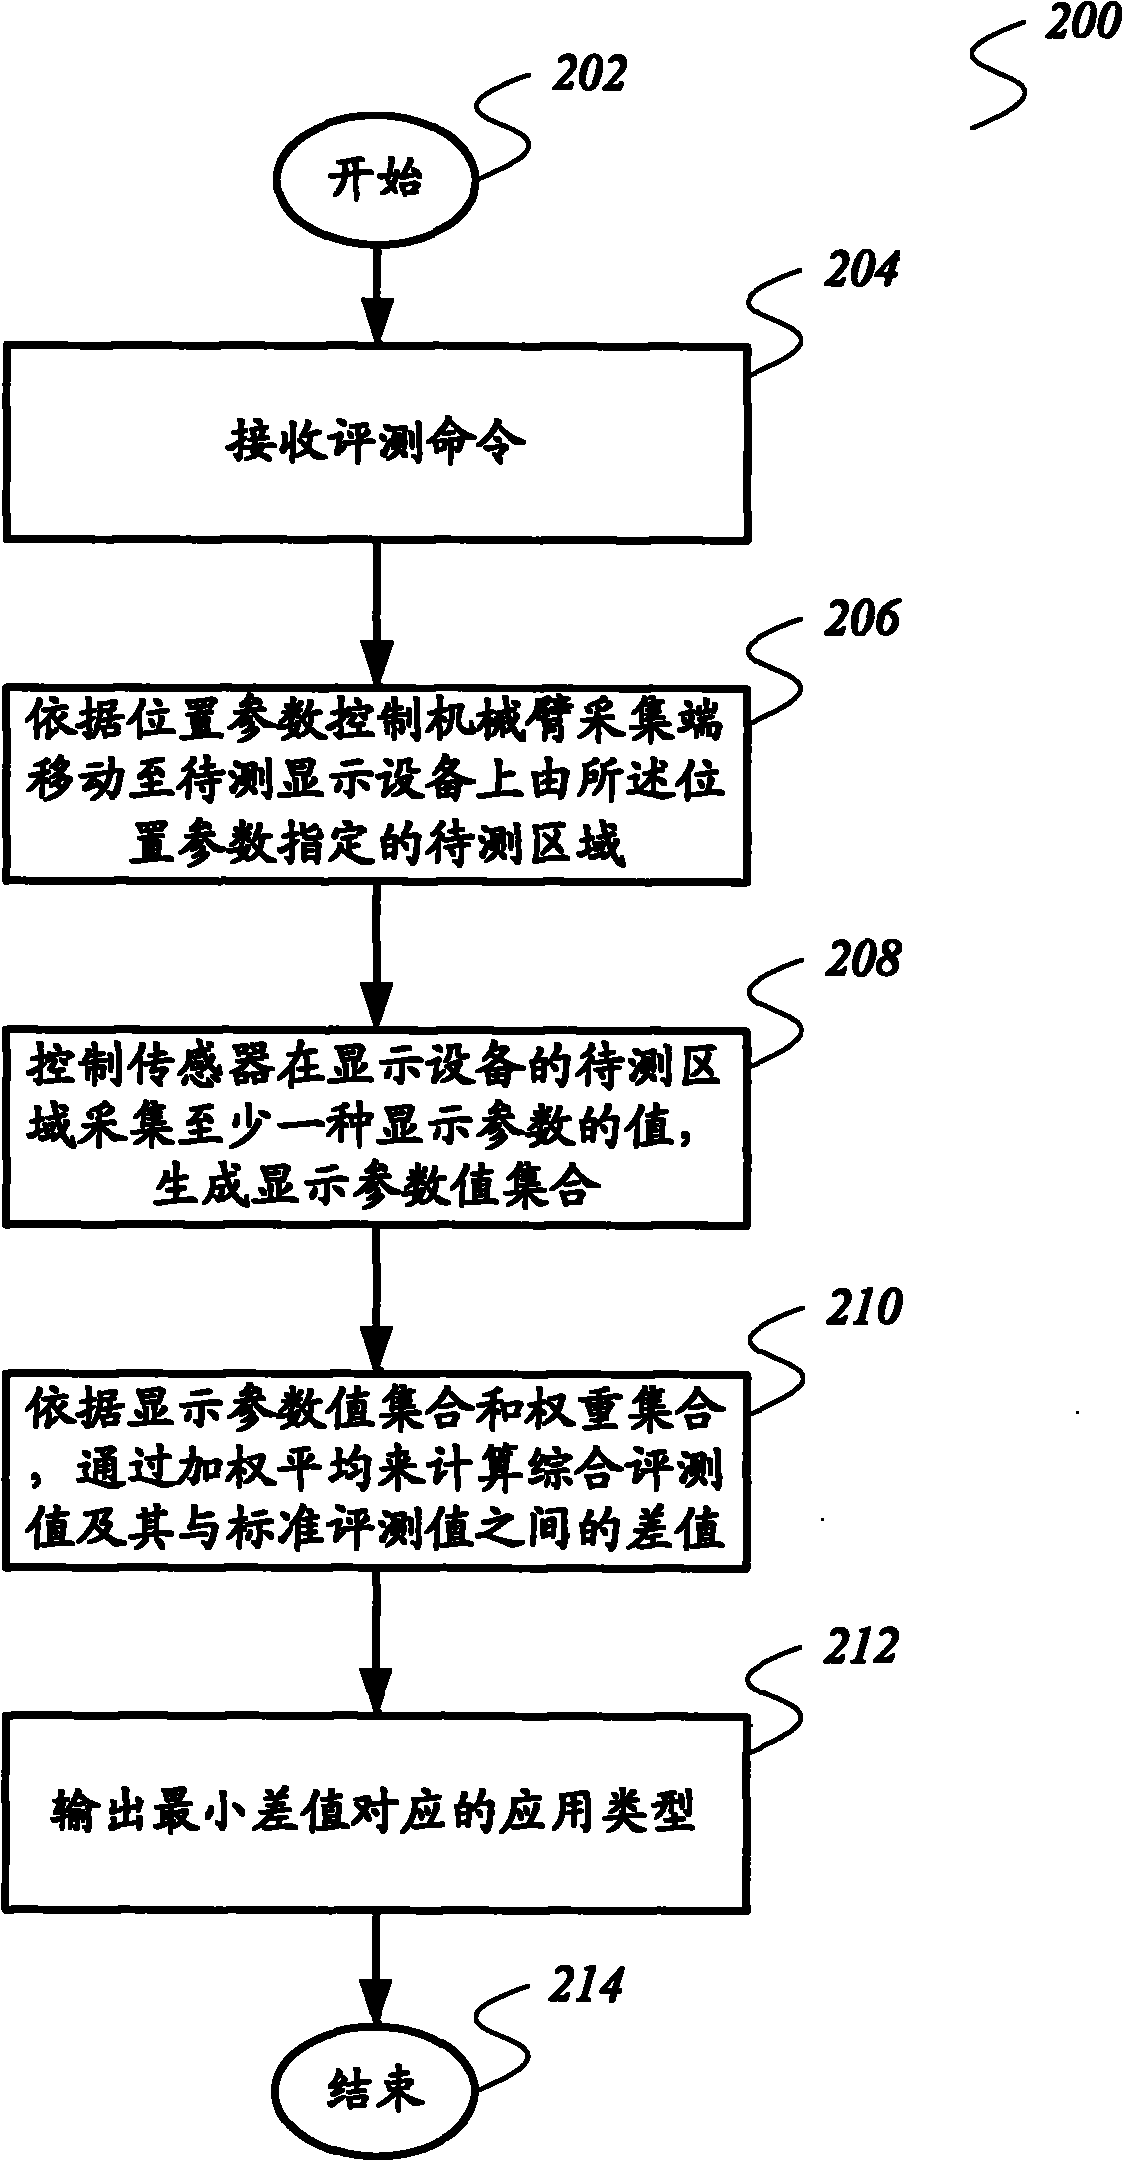 Display equipment evaluation system and display equipment evaluation method